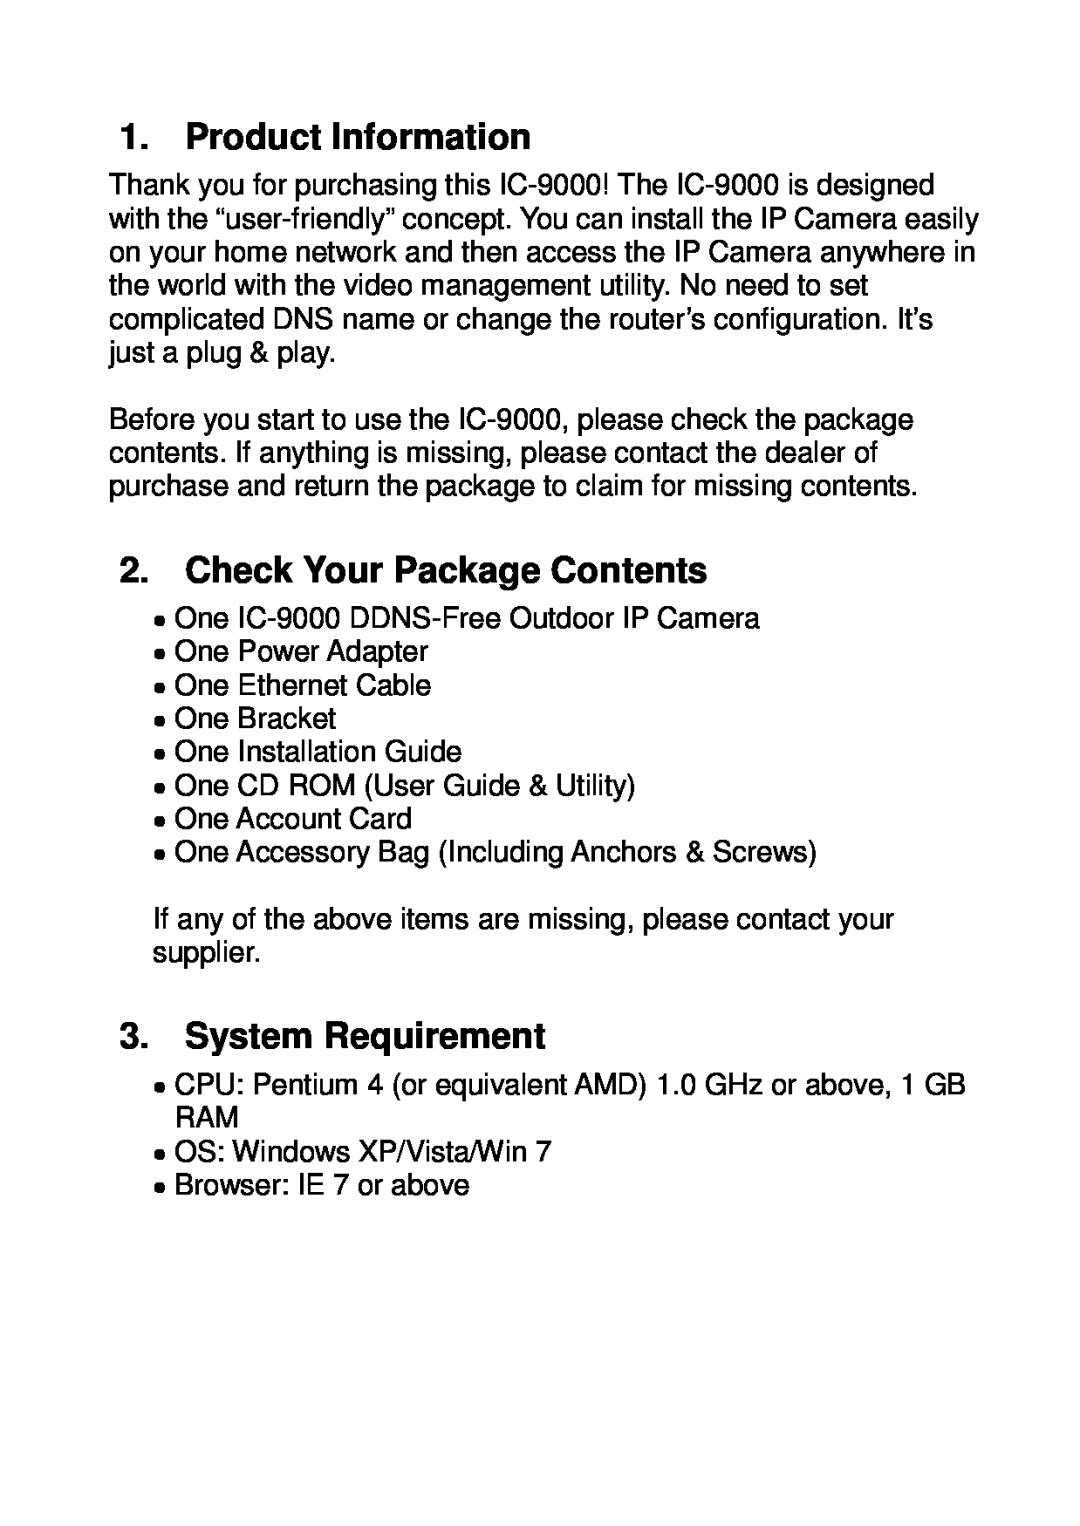 Edimax Technology IC-9000 manual Product Information, Check Your Package Contents, System Requirement 